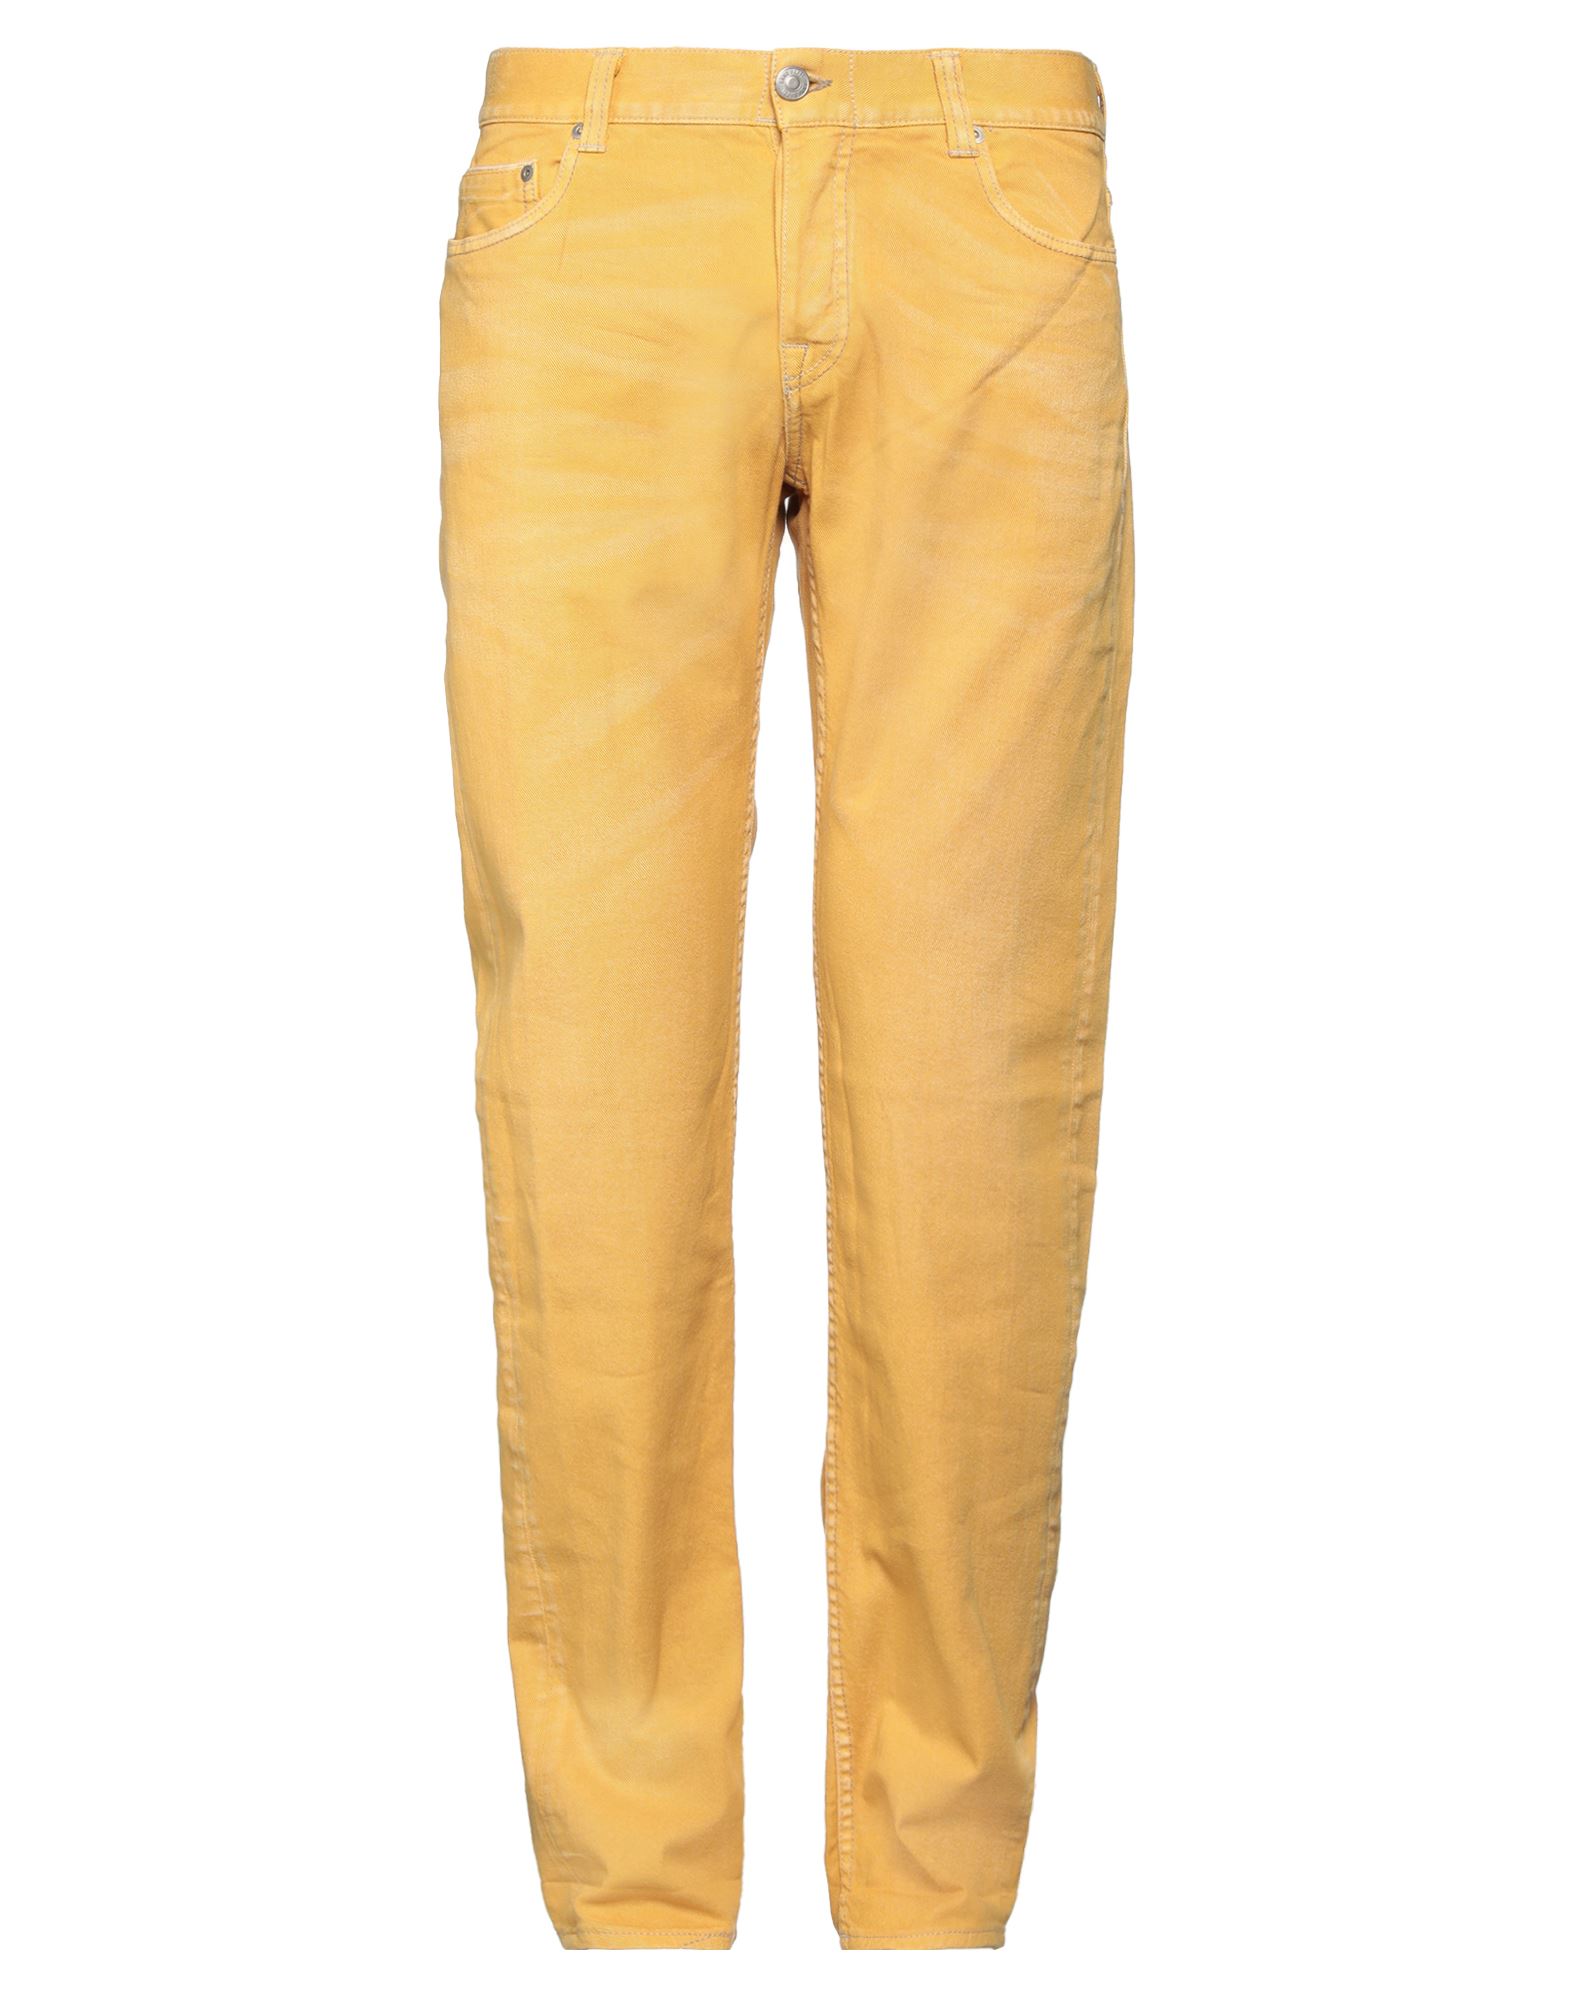 Care Label Jeans In Yellow